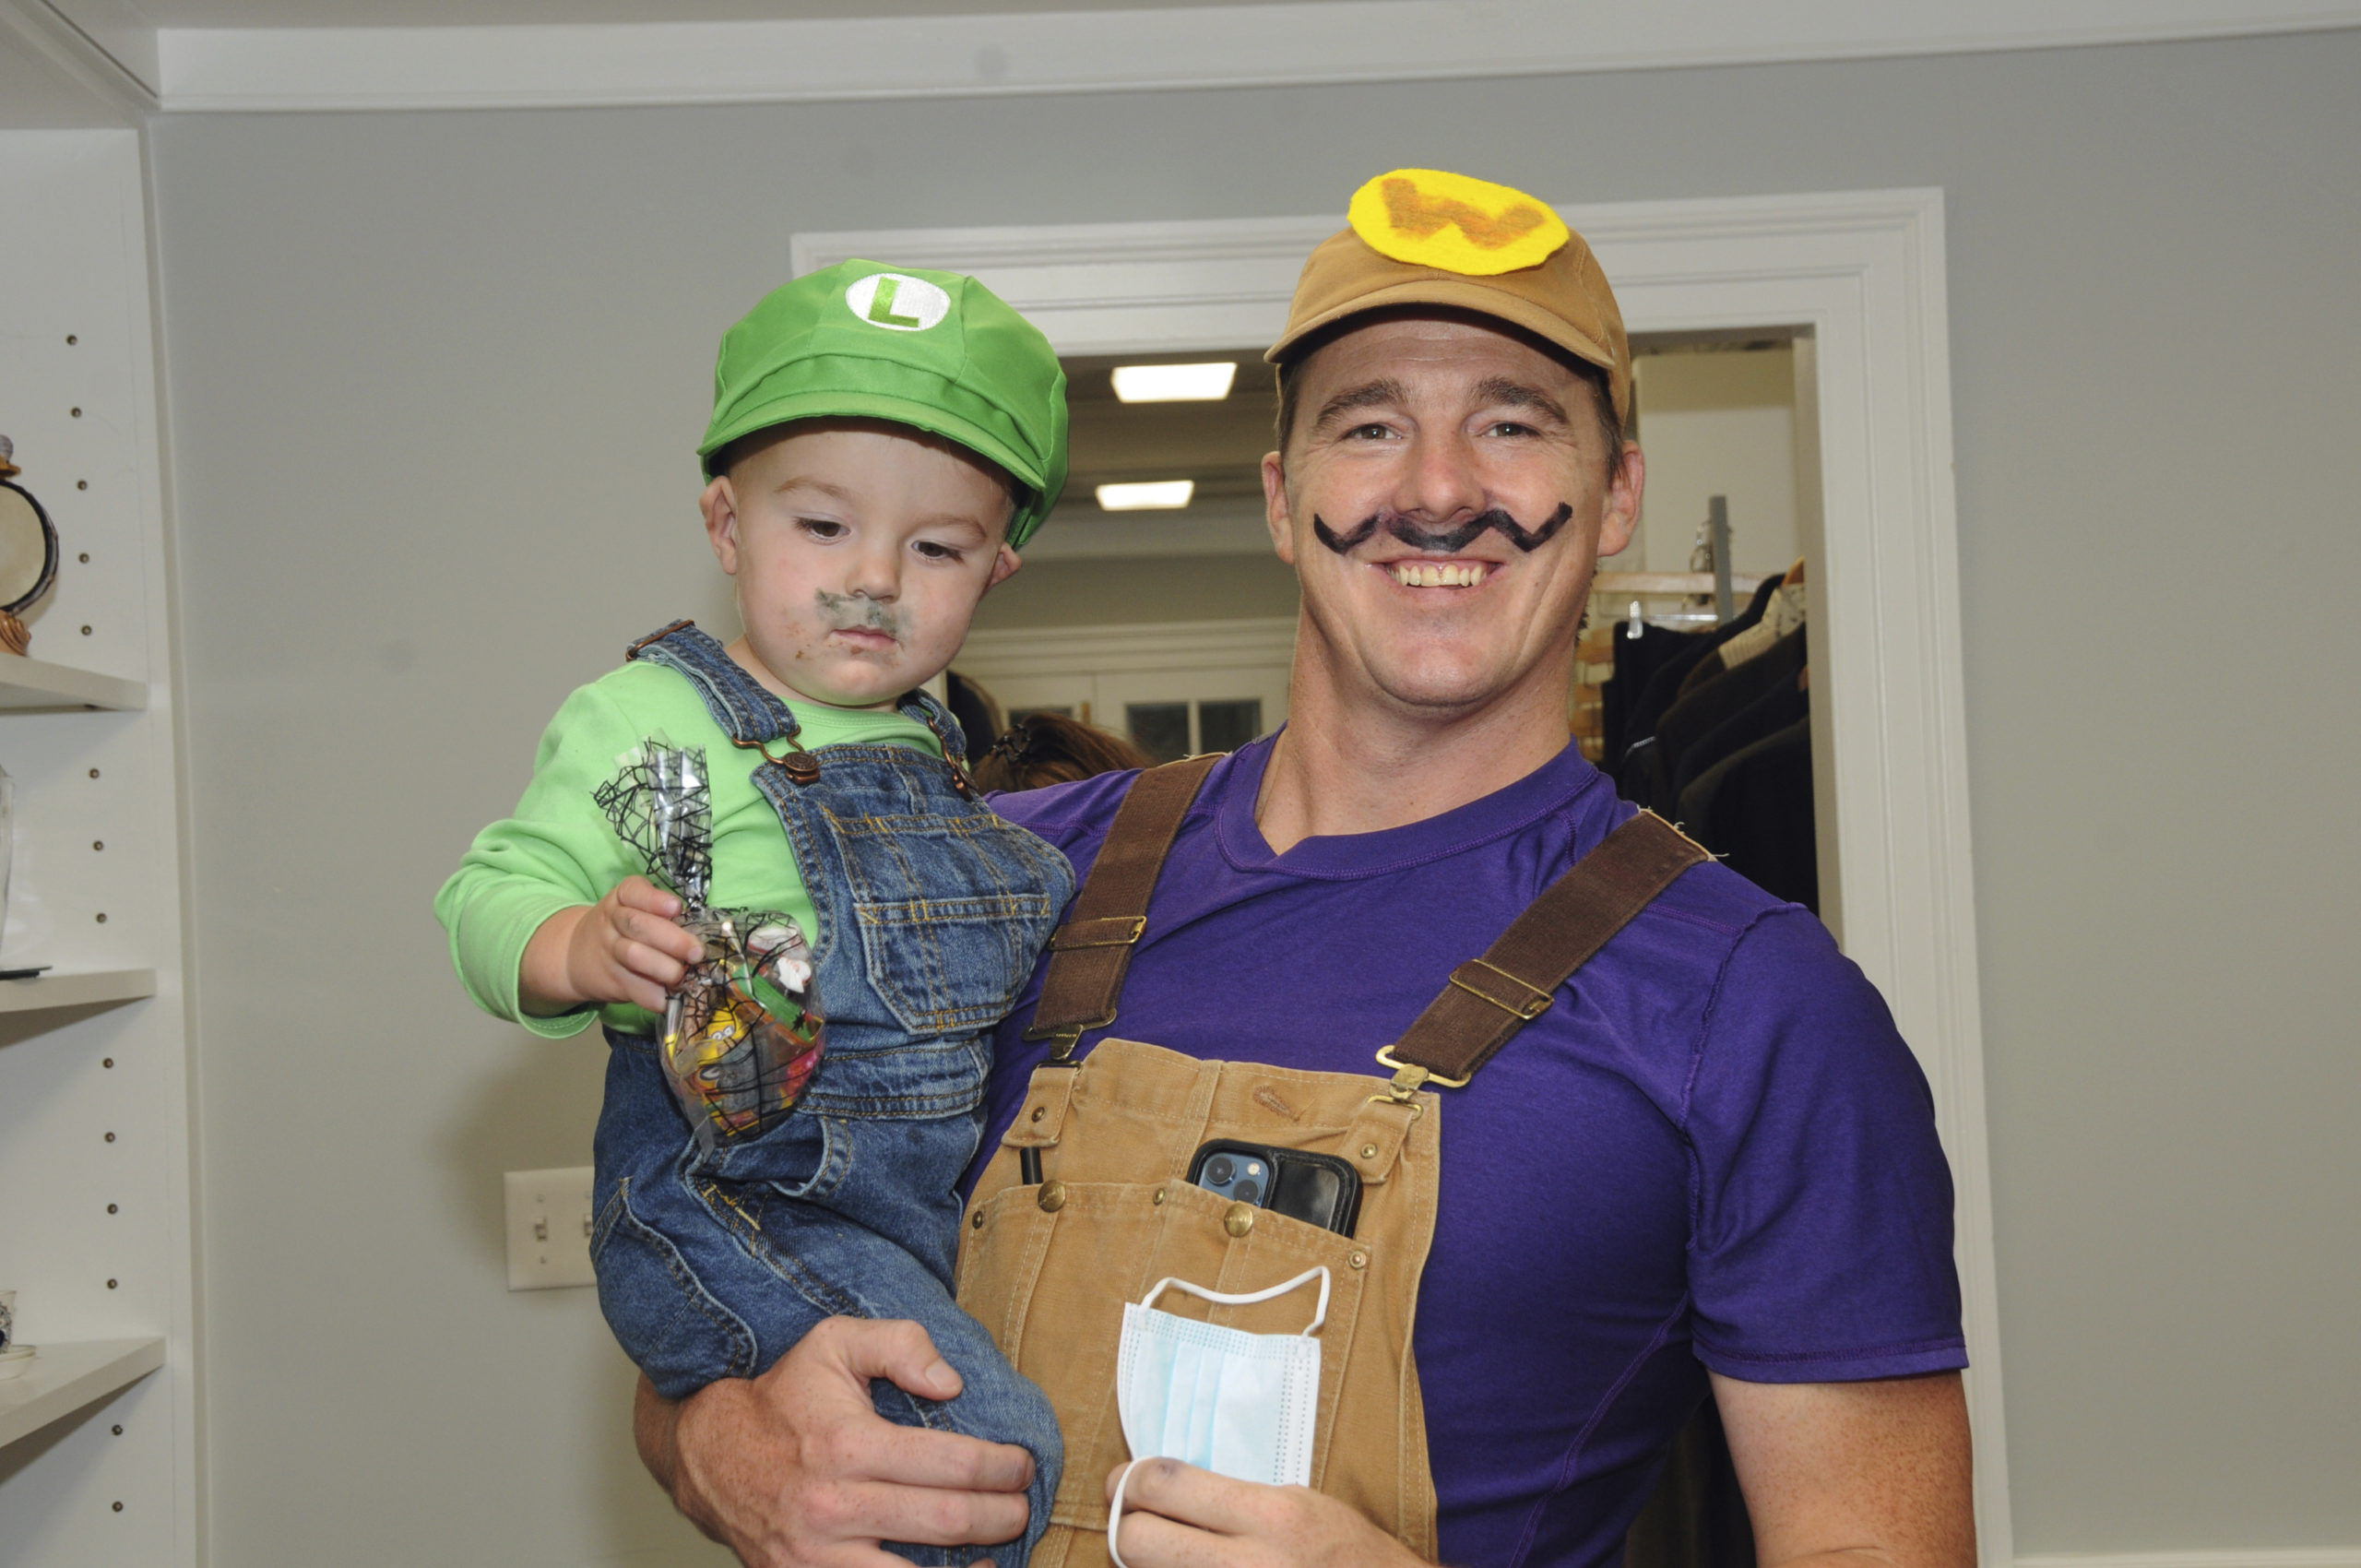 Ryder and P.J. Wizelius at the Ladies Village Improvement Society of East Hampton's Halloween Open House for neighborhood youngsters on Saturday. Children were encouraged to come in costume for an afternoon of Halloween crafts, treats, Bingo, music and a book reading of 